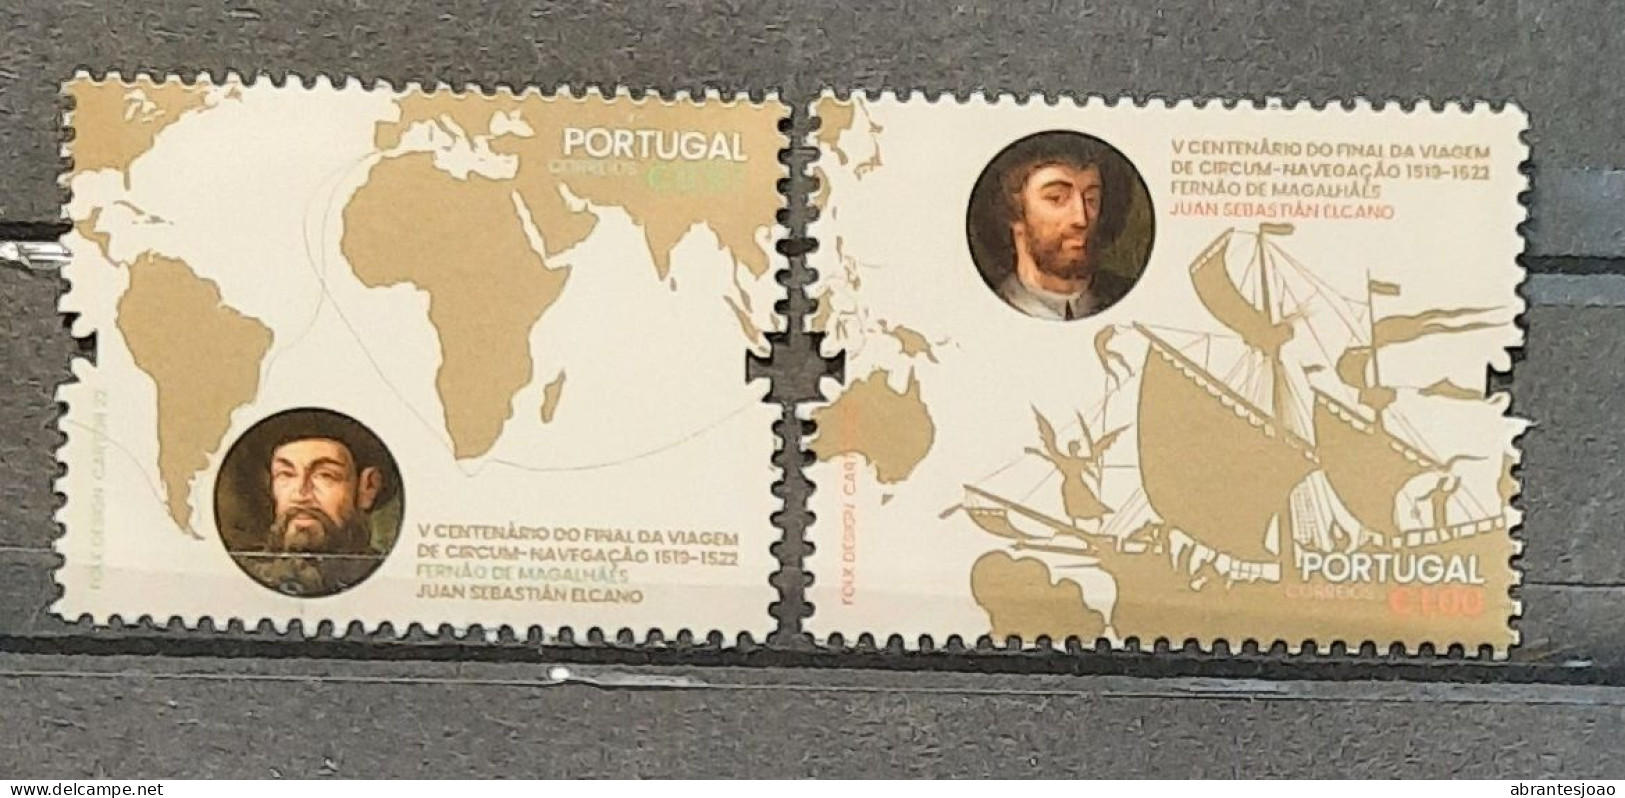 2022 - Portugal - MNH - 500 Years Since Final Of Circumnavigation Trip - 1519/1522 - 2 Stamps + Circular Block 1 Stamp - Neufs